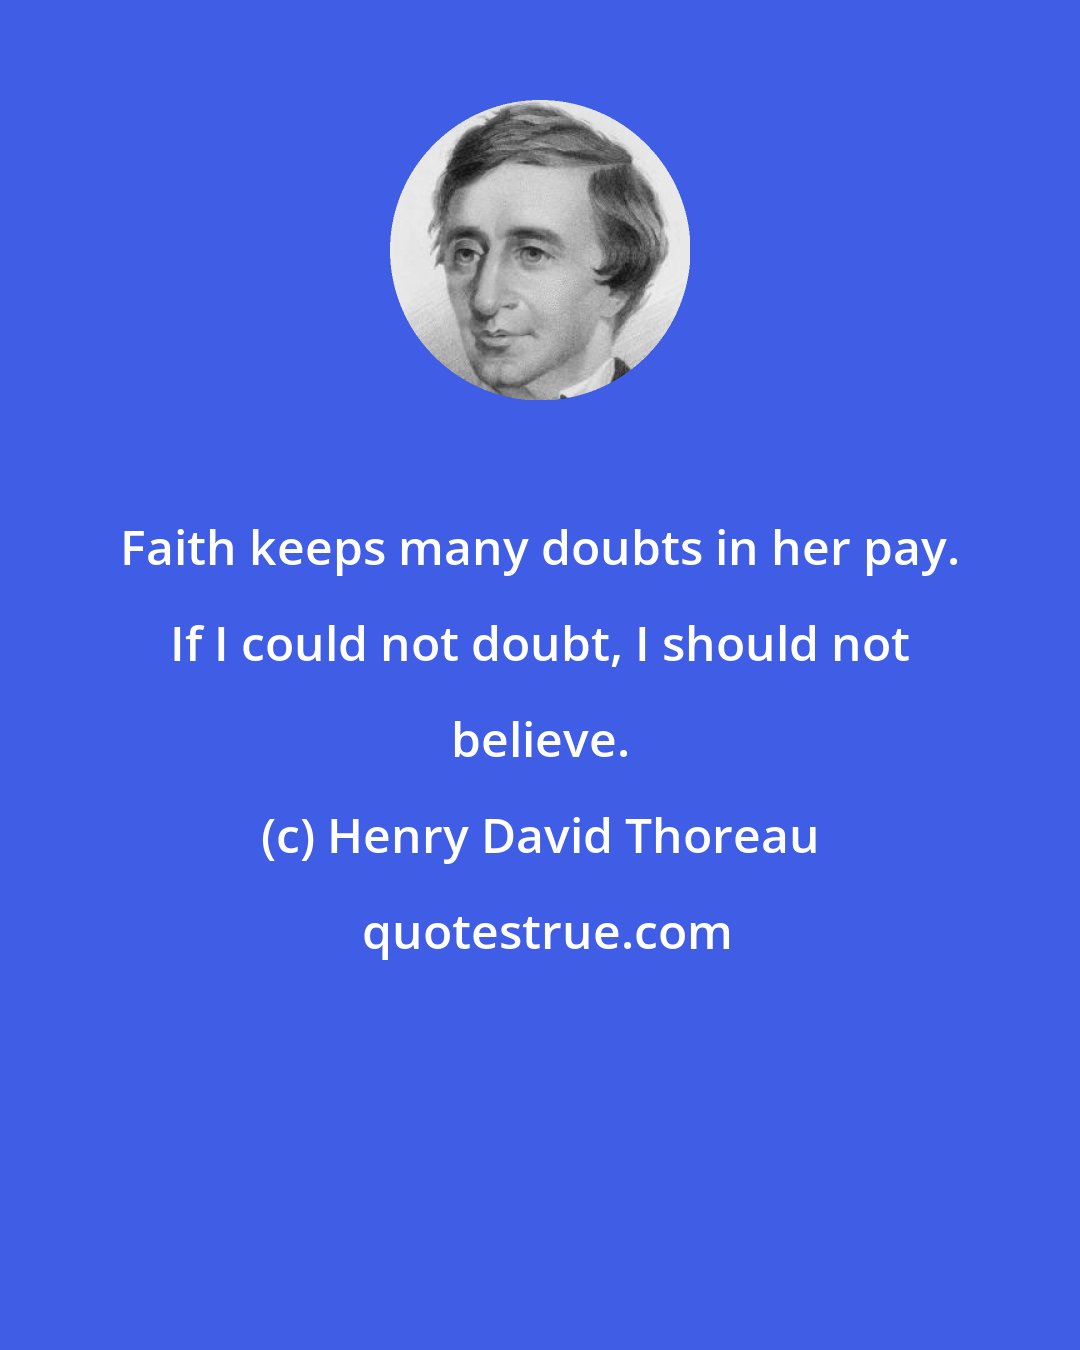 Henry David Thoreau: Faith keeps many doubts in her pay. If I could not doubt, I should not believe.